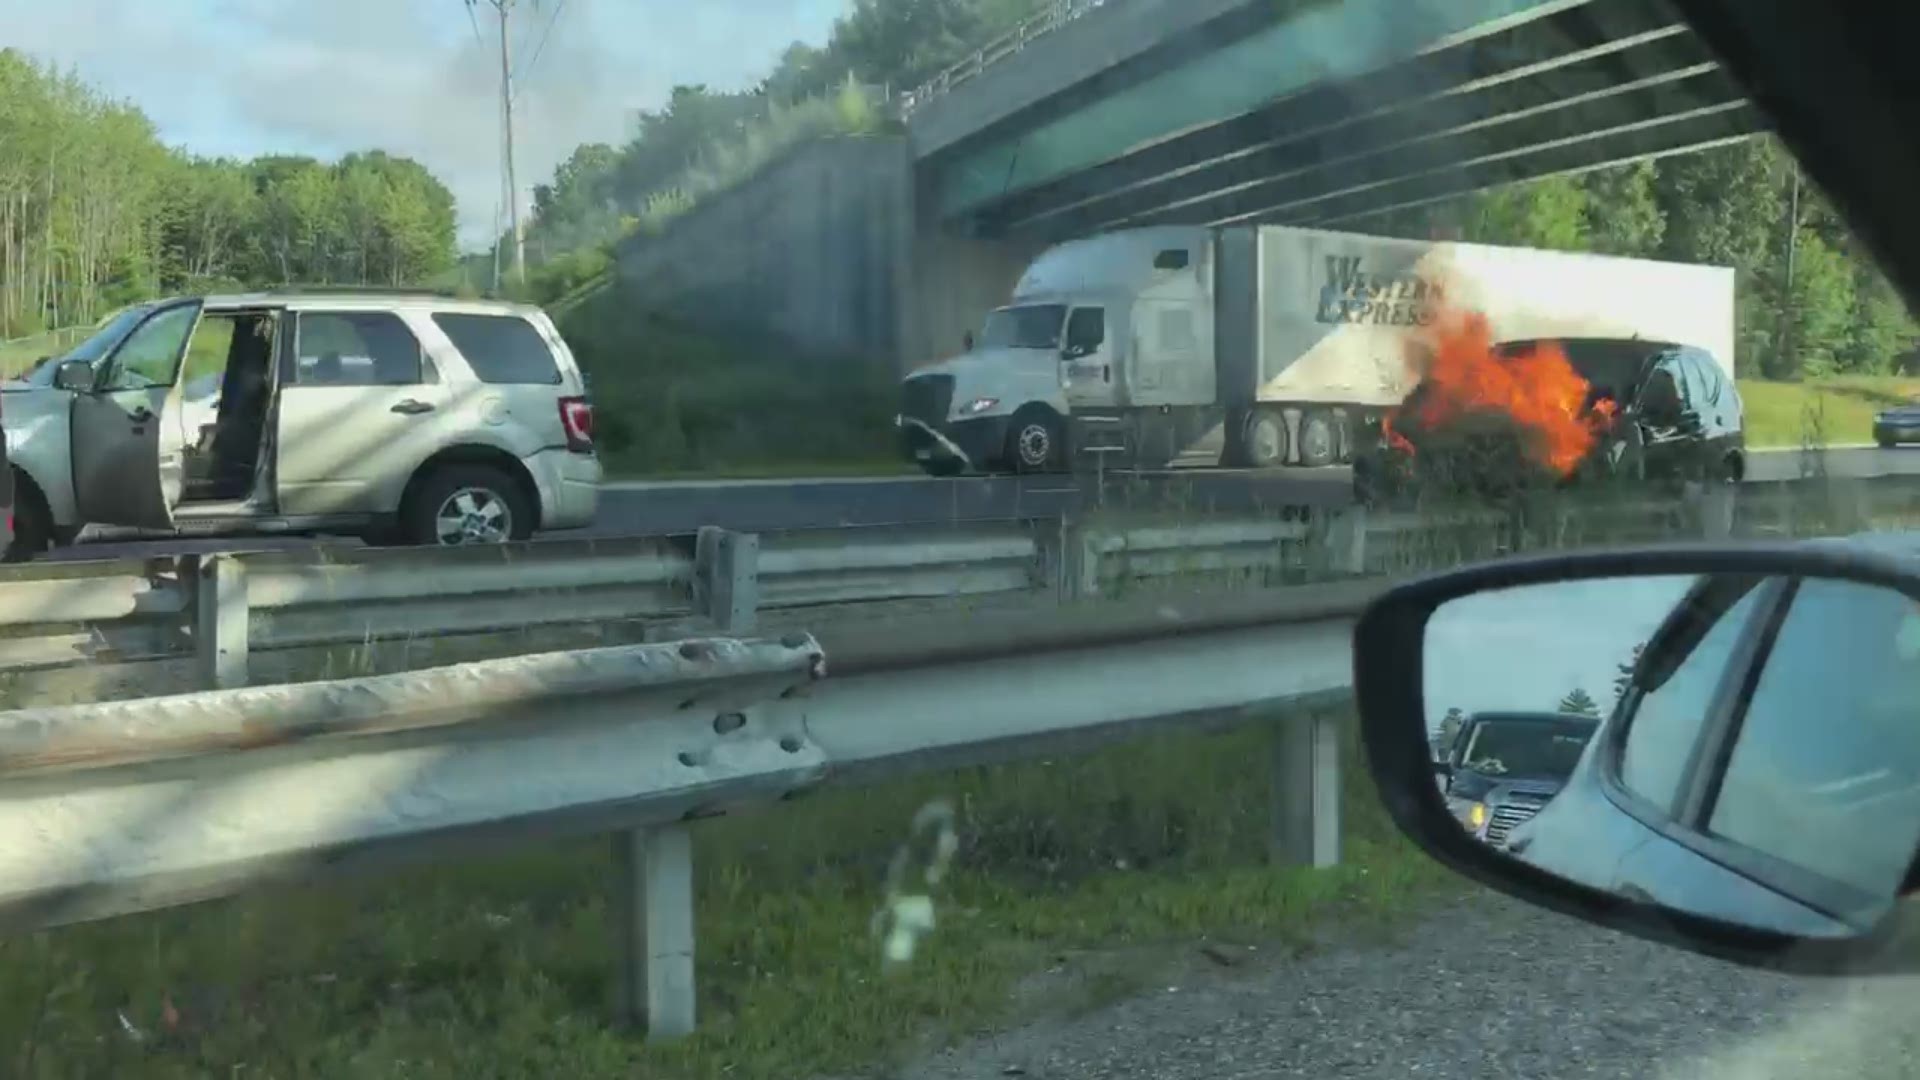 Traffic slows for Scarborough car fire on Maine Turnpike